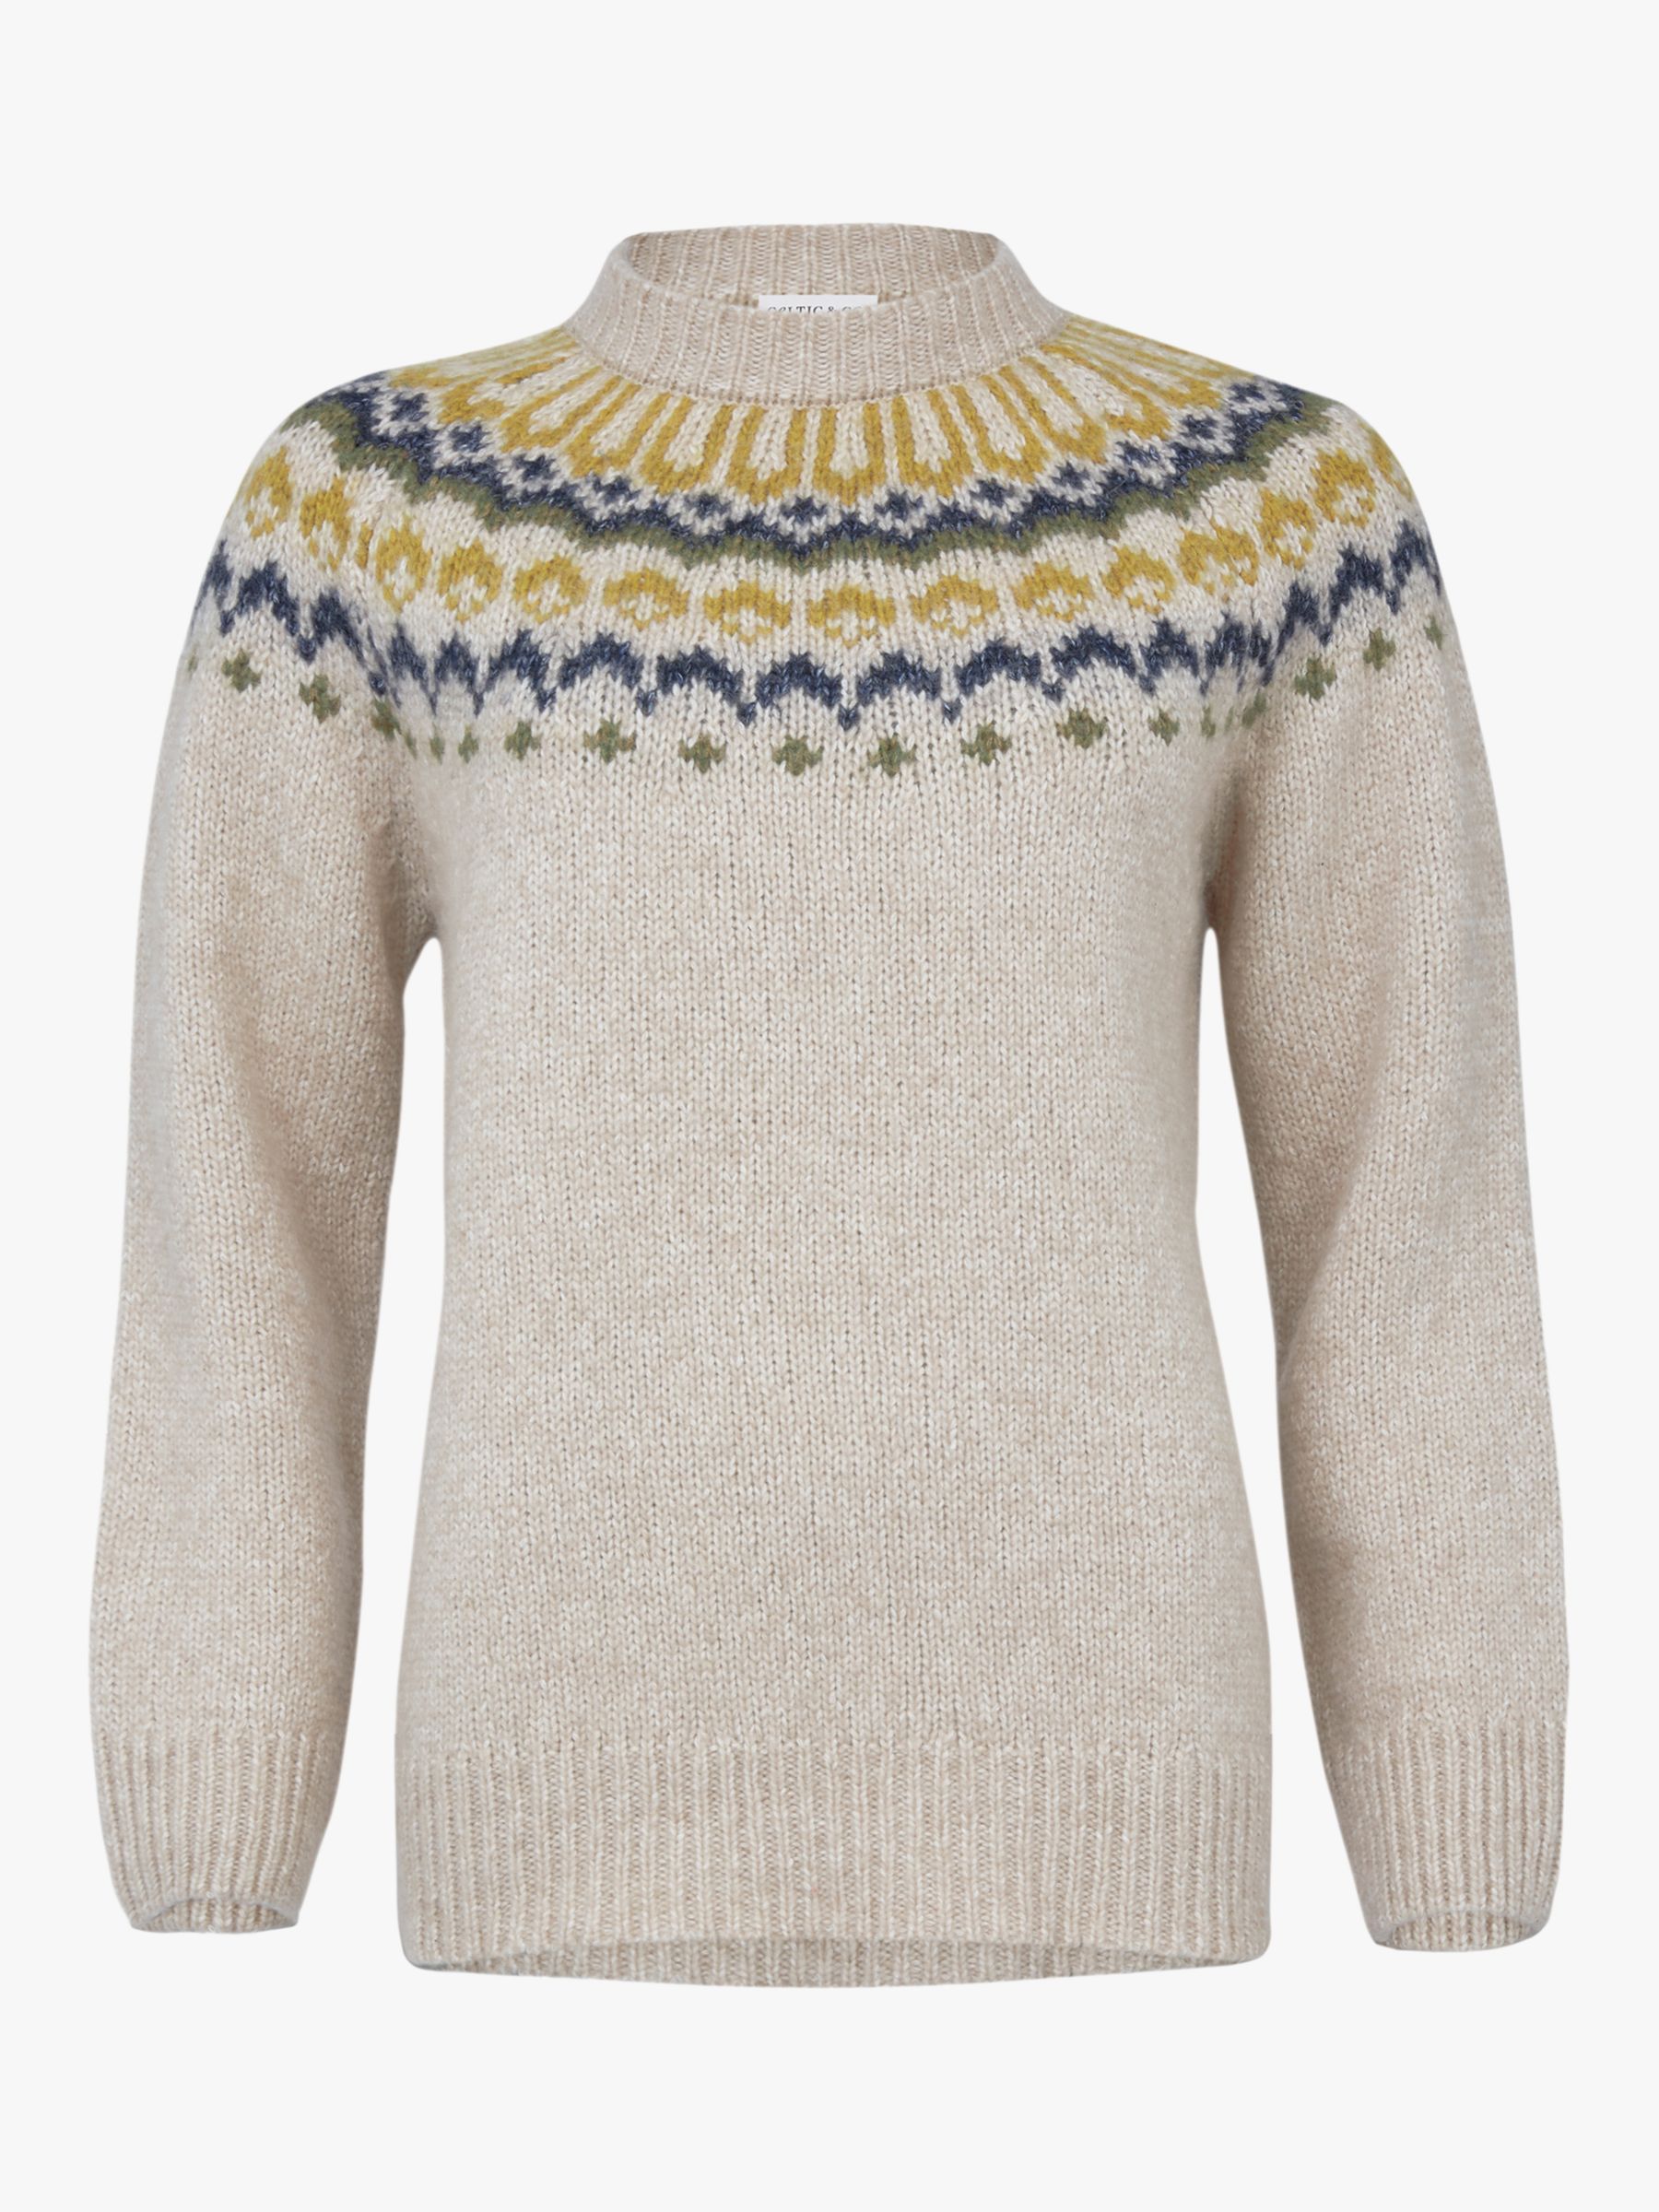 Buy Celtic & Co. Luxe Fair Isle Cotton Blend Jumper, Oatmeal Online at johnlewis.com